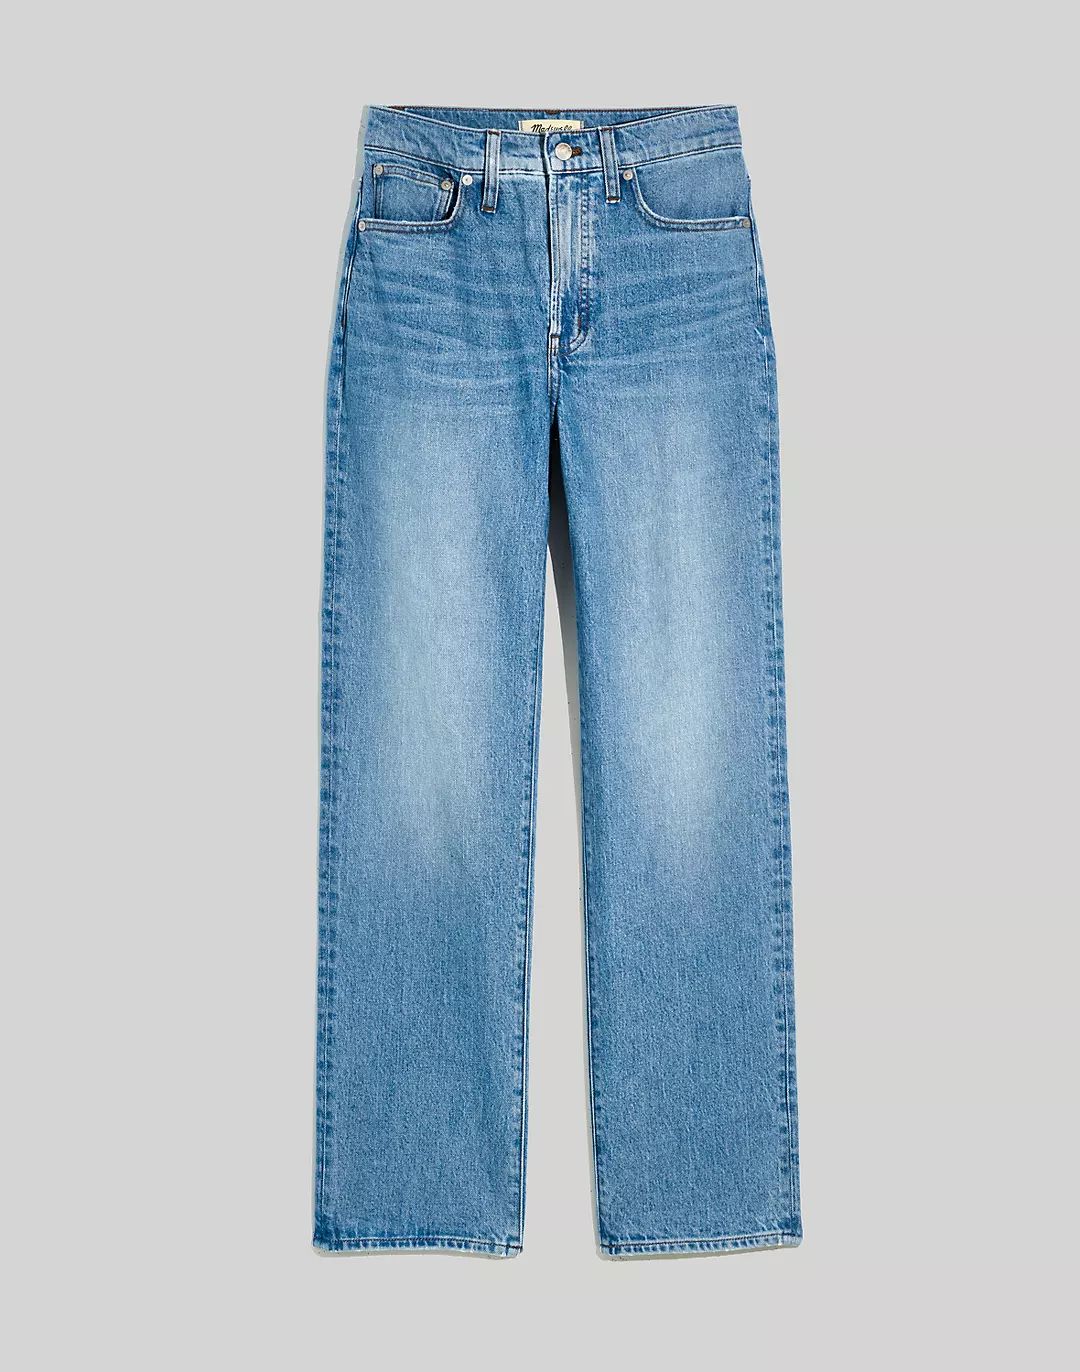 The Plus Perfect Vintage Straight Jean in Delafield Wash: Button-Fly Edition | Madewell